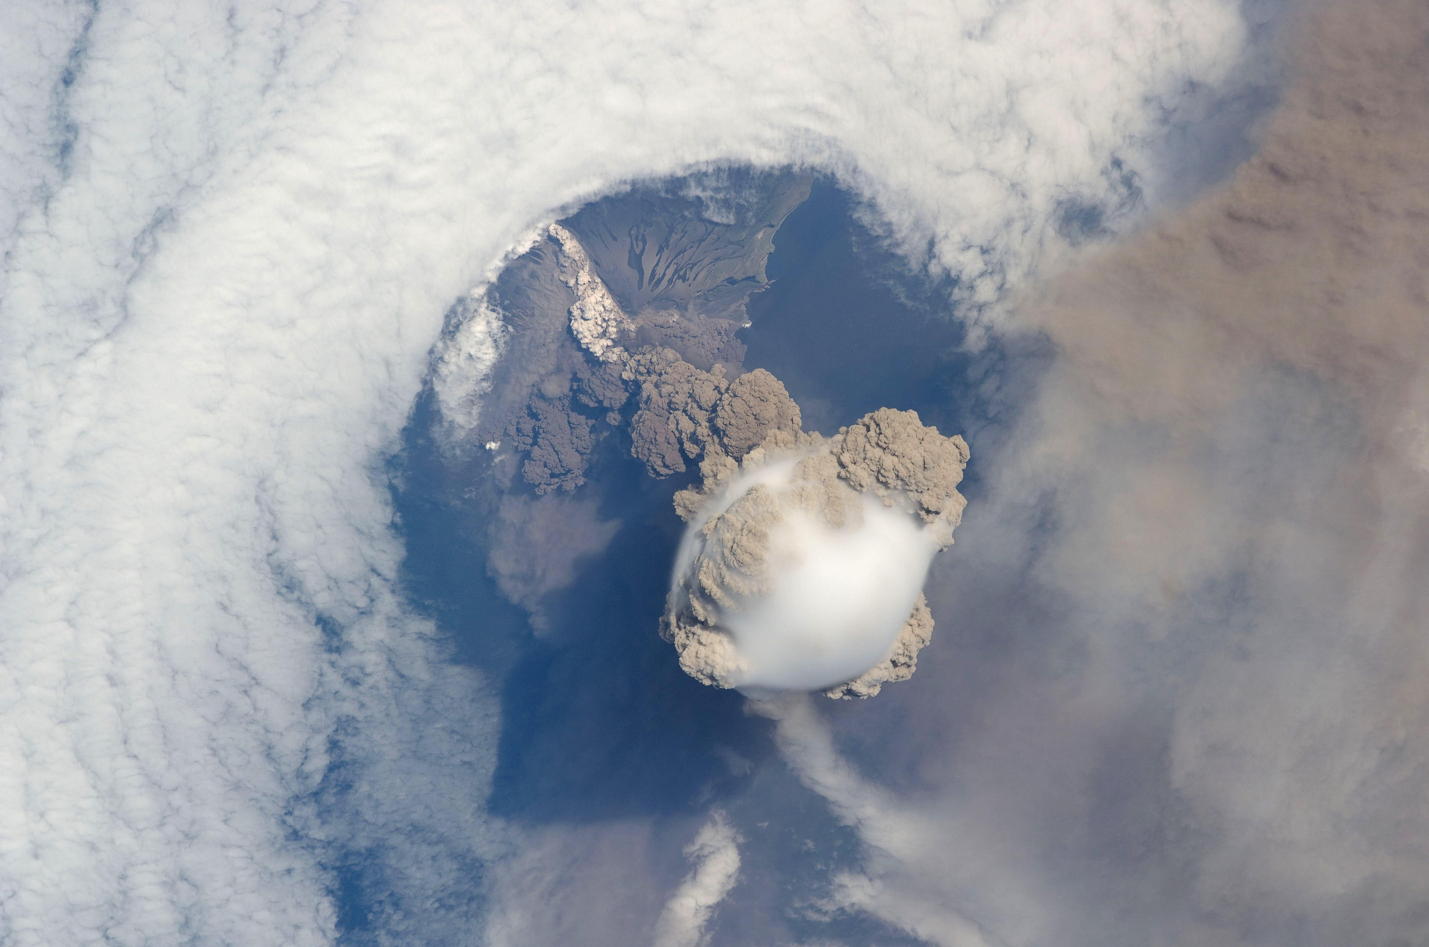 Sarychev volcano: “A picture of Russia&#39;s Sarychev Volcano, located in the Kuril Islands, erupting, as seen from the International Space Station.”; volcanoes